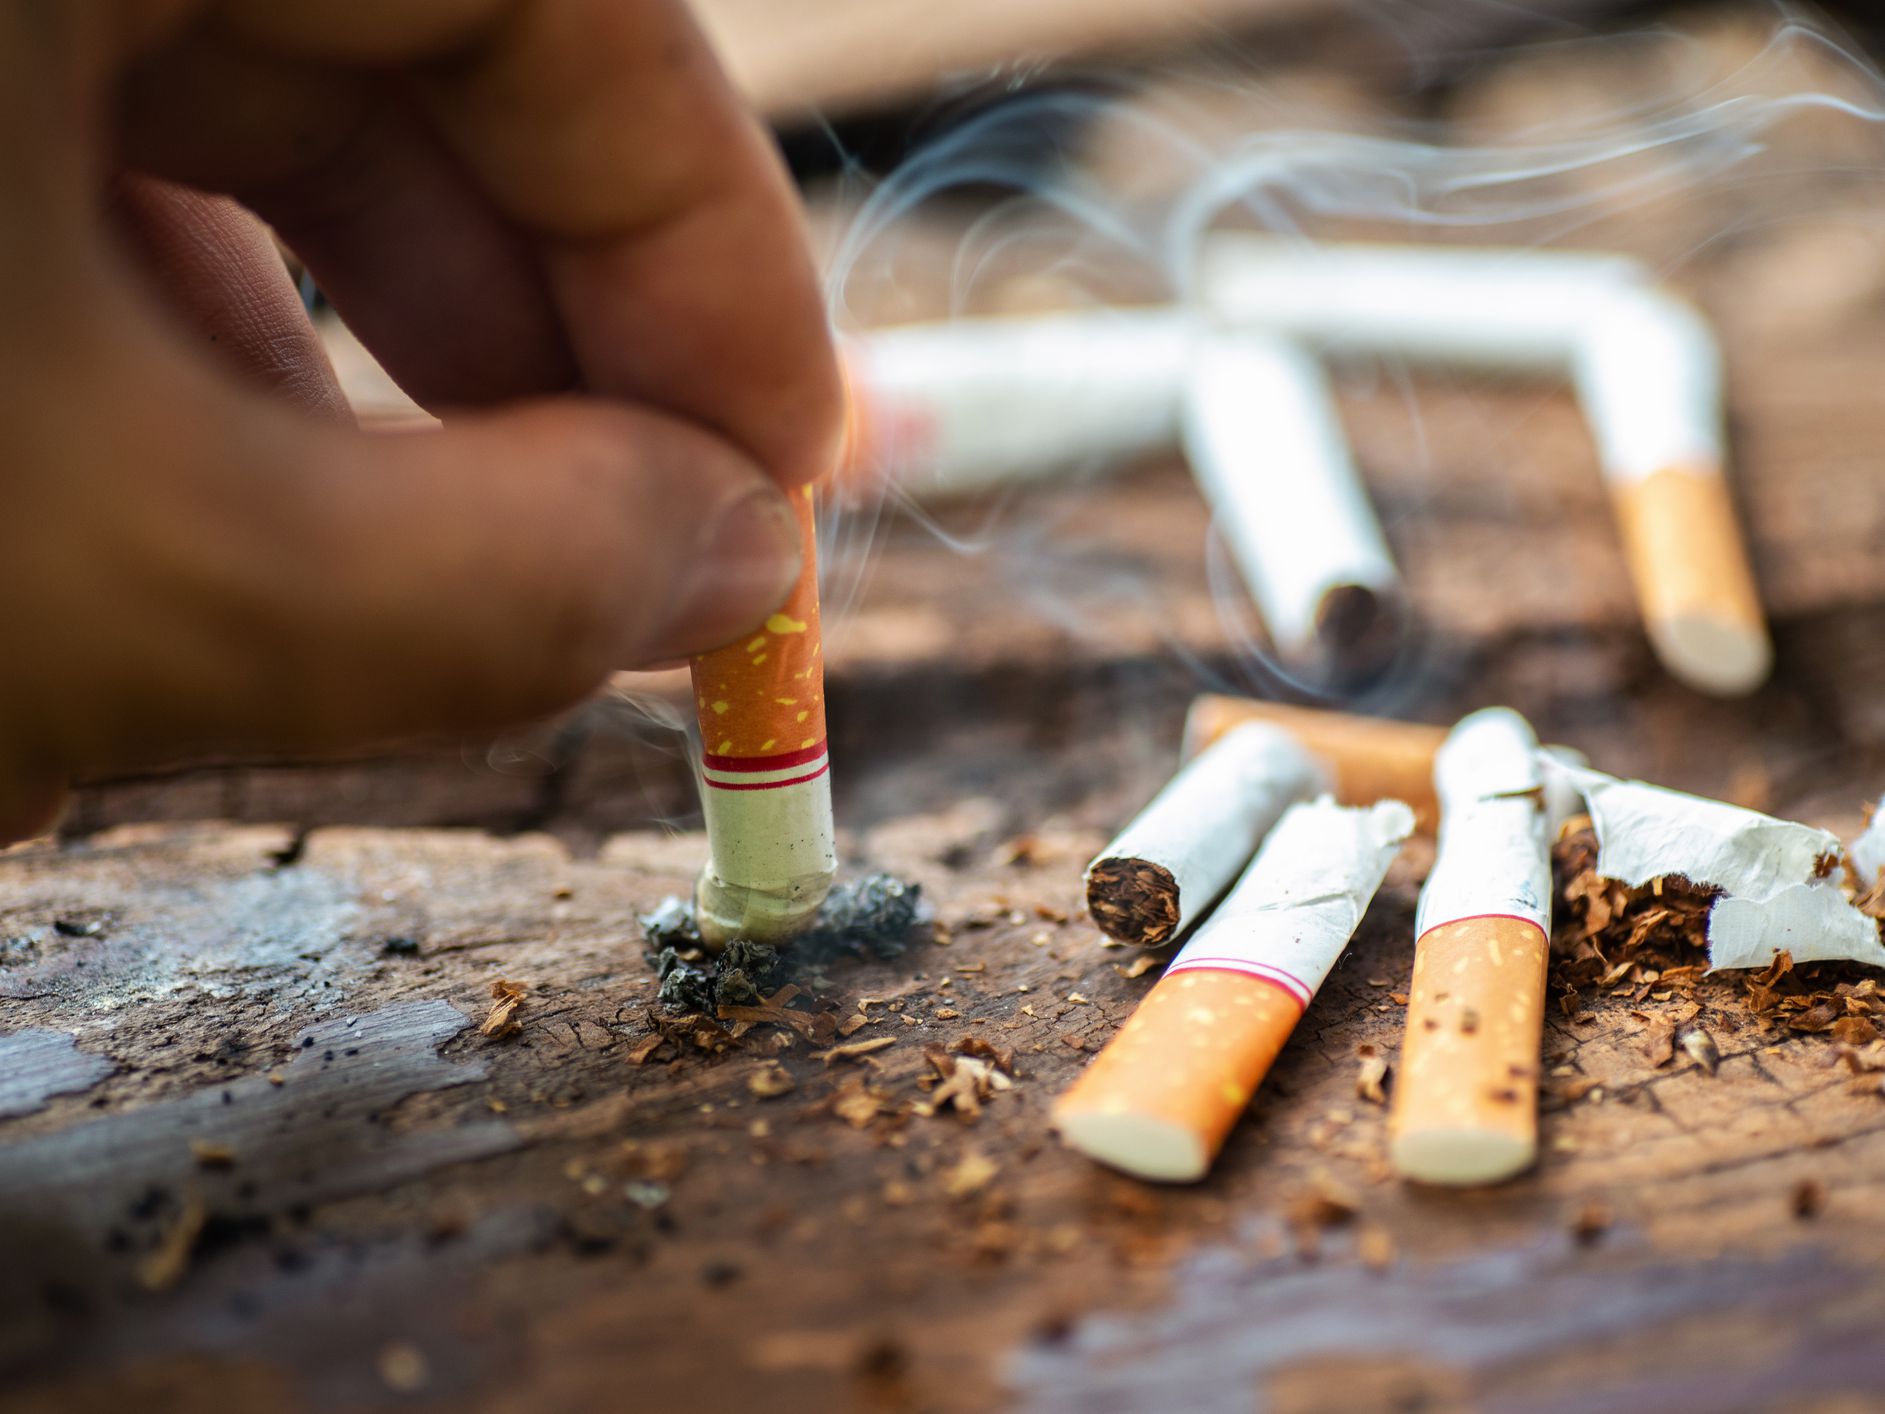 Lax implementation of ban on consumption of tobacco products at public places